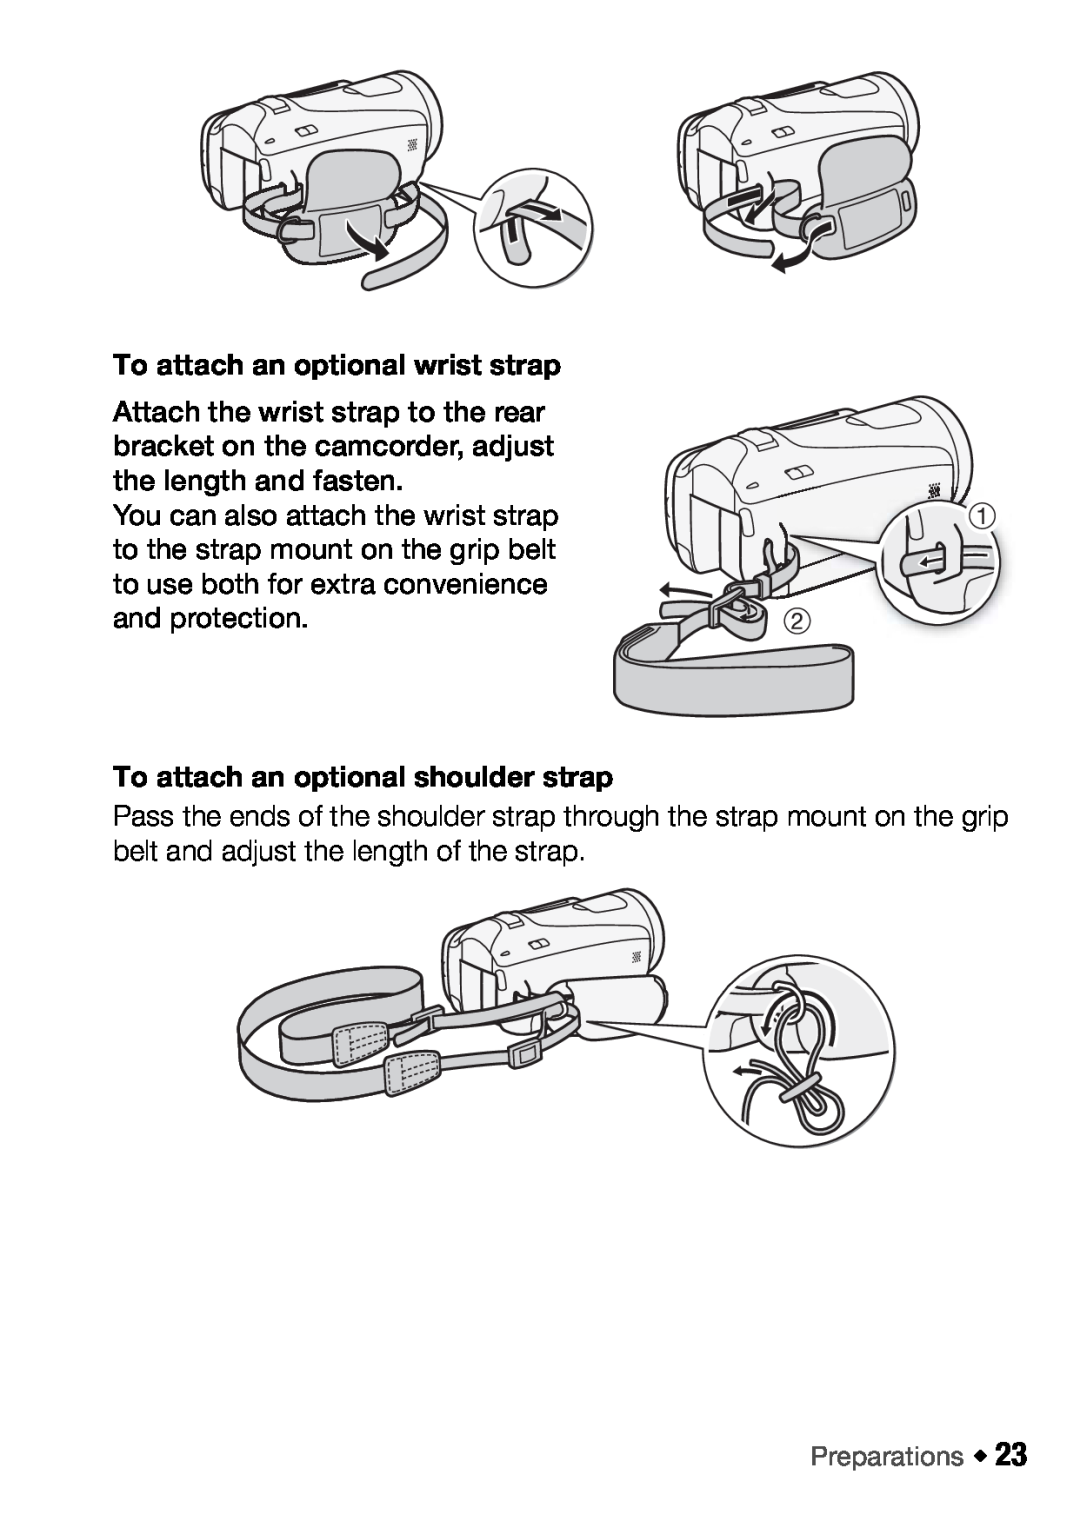 Canon HFM46, HFM406 instruction manual To attach an optional wrist strap, To attach an optional shoulder strap 